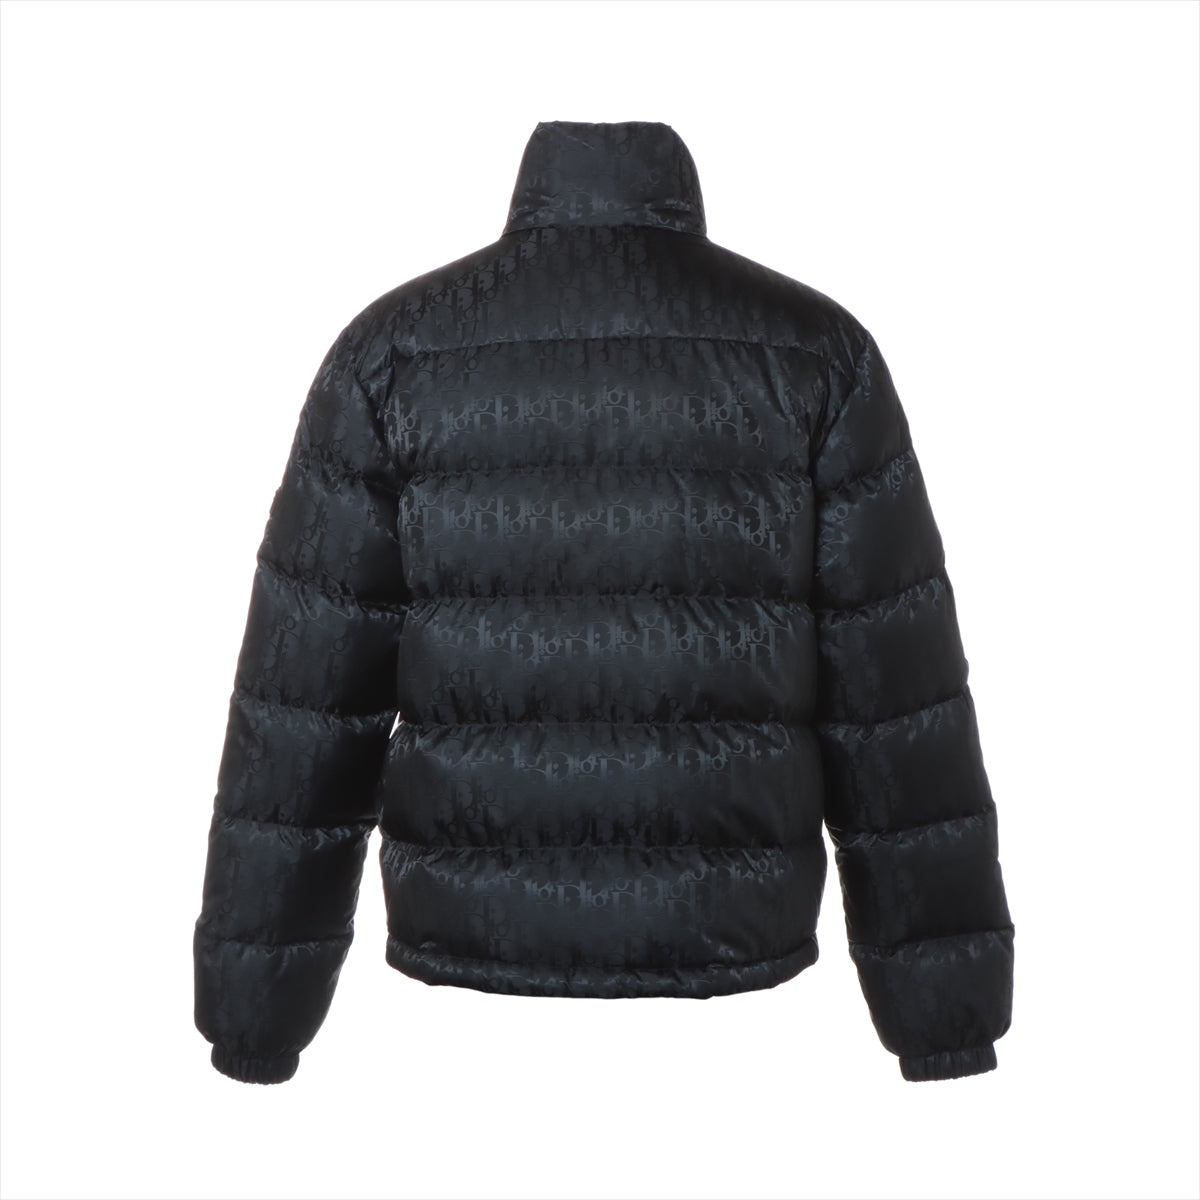 Dior Oblique 19AW Nylon Down jacket 46 Men's Navy Blue  943C449A4462 There is a scuff